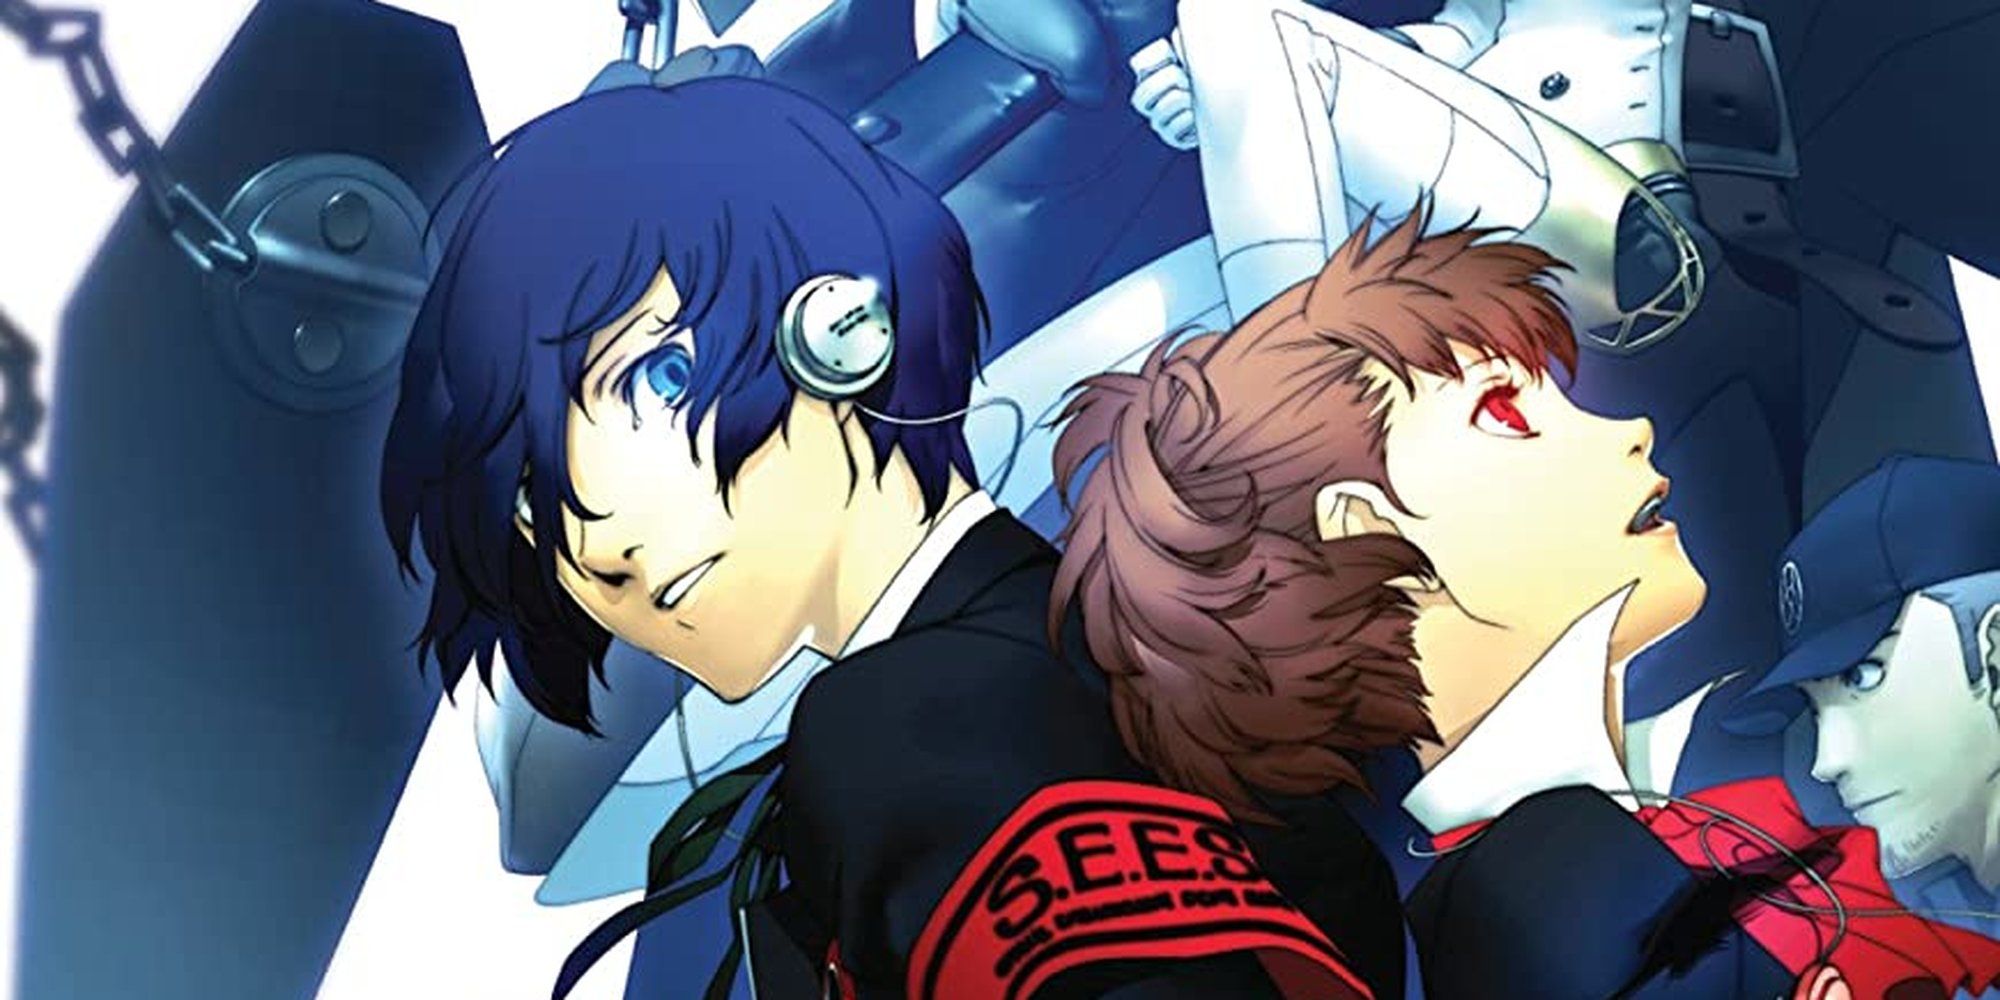 Persona 3 Portable: What are the Canon Names for the Male and Female